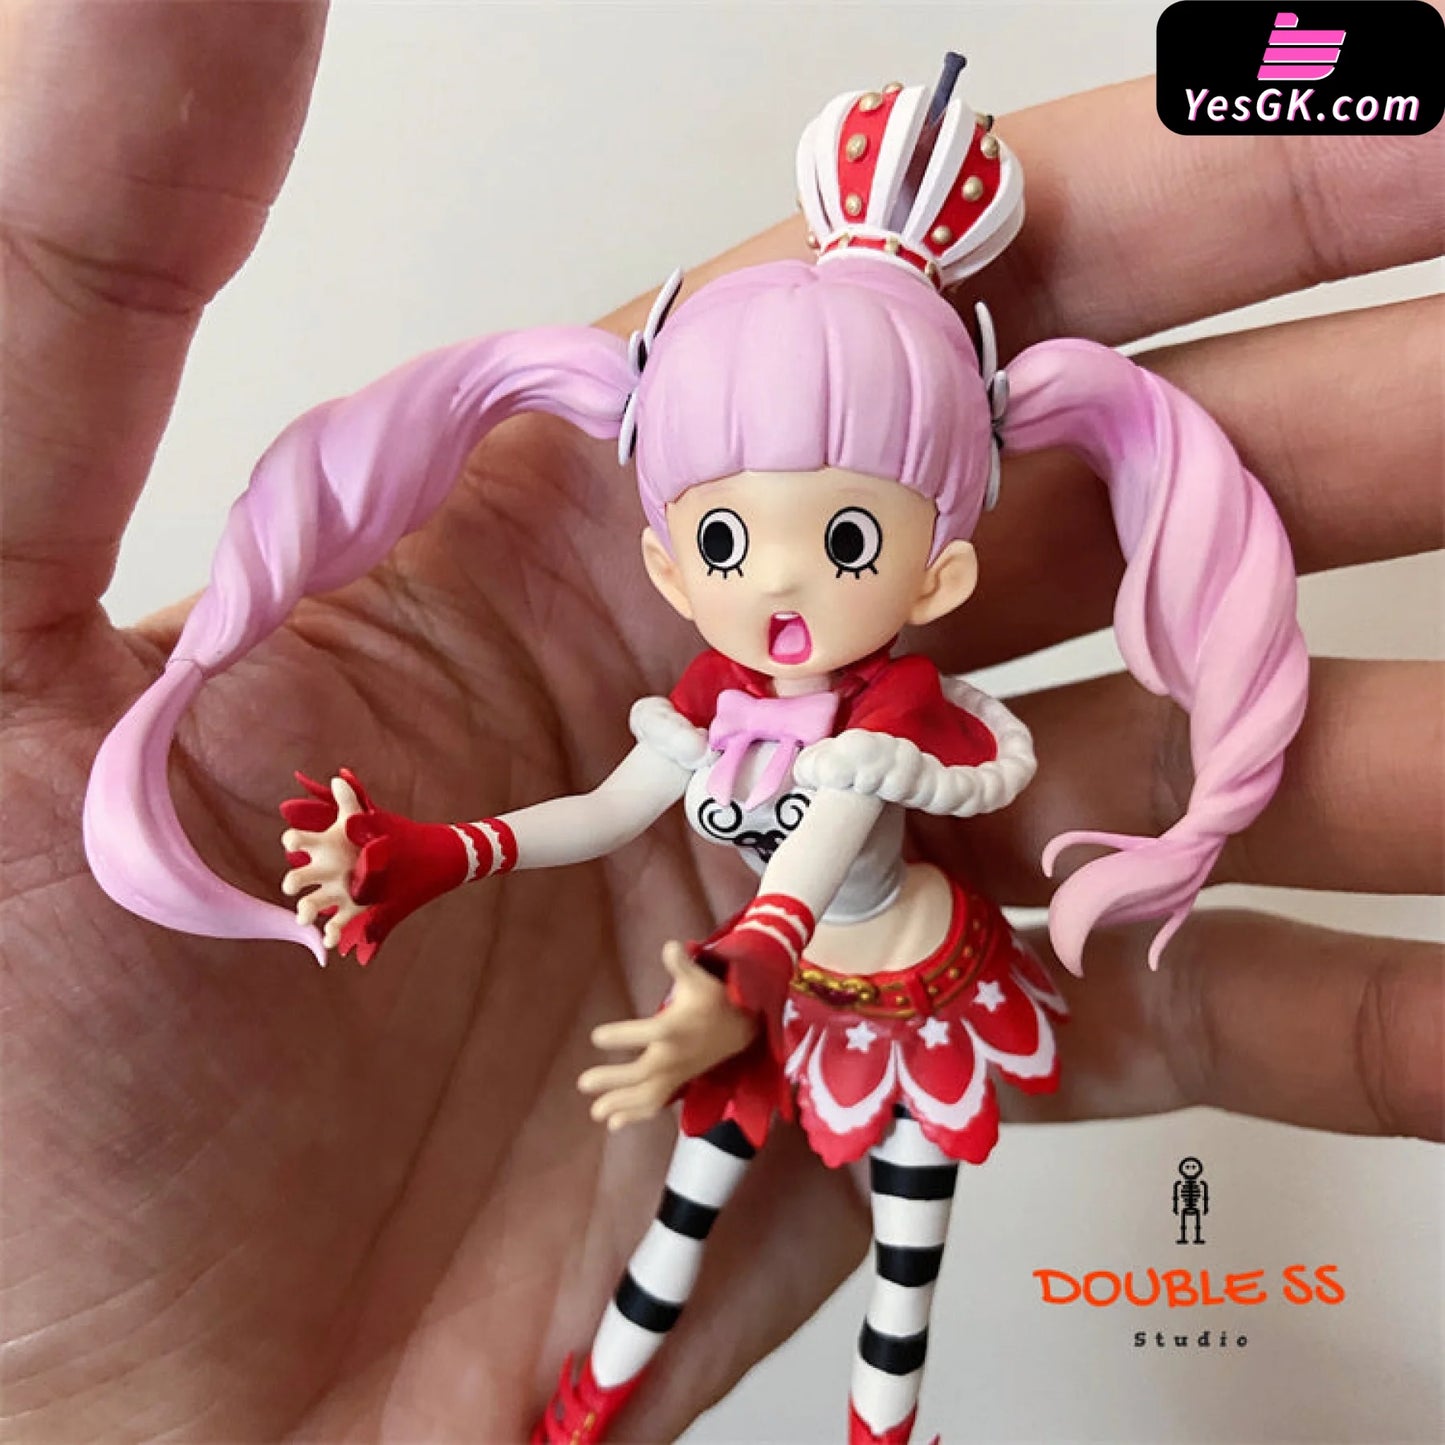 One Piece Ghost Princess Perona Resin Statue - Double Ss Studio [Pre-Order Closed]